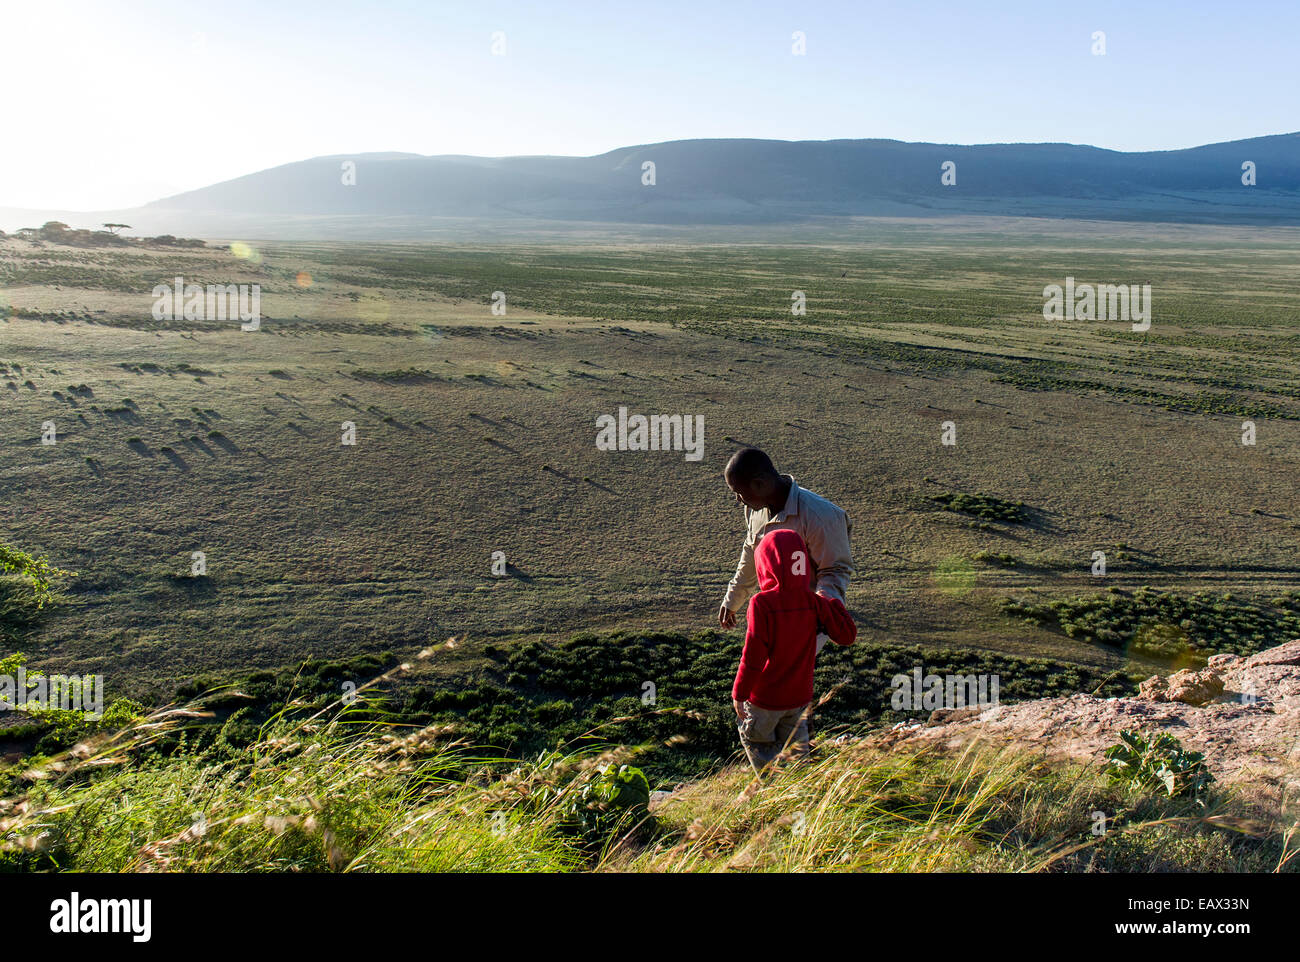 A safari guide assists a small child to climb down the steep surface of a rocky outcrop. Stock Photo